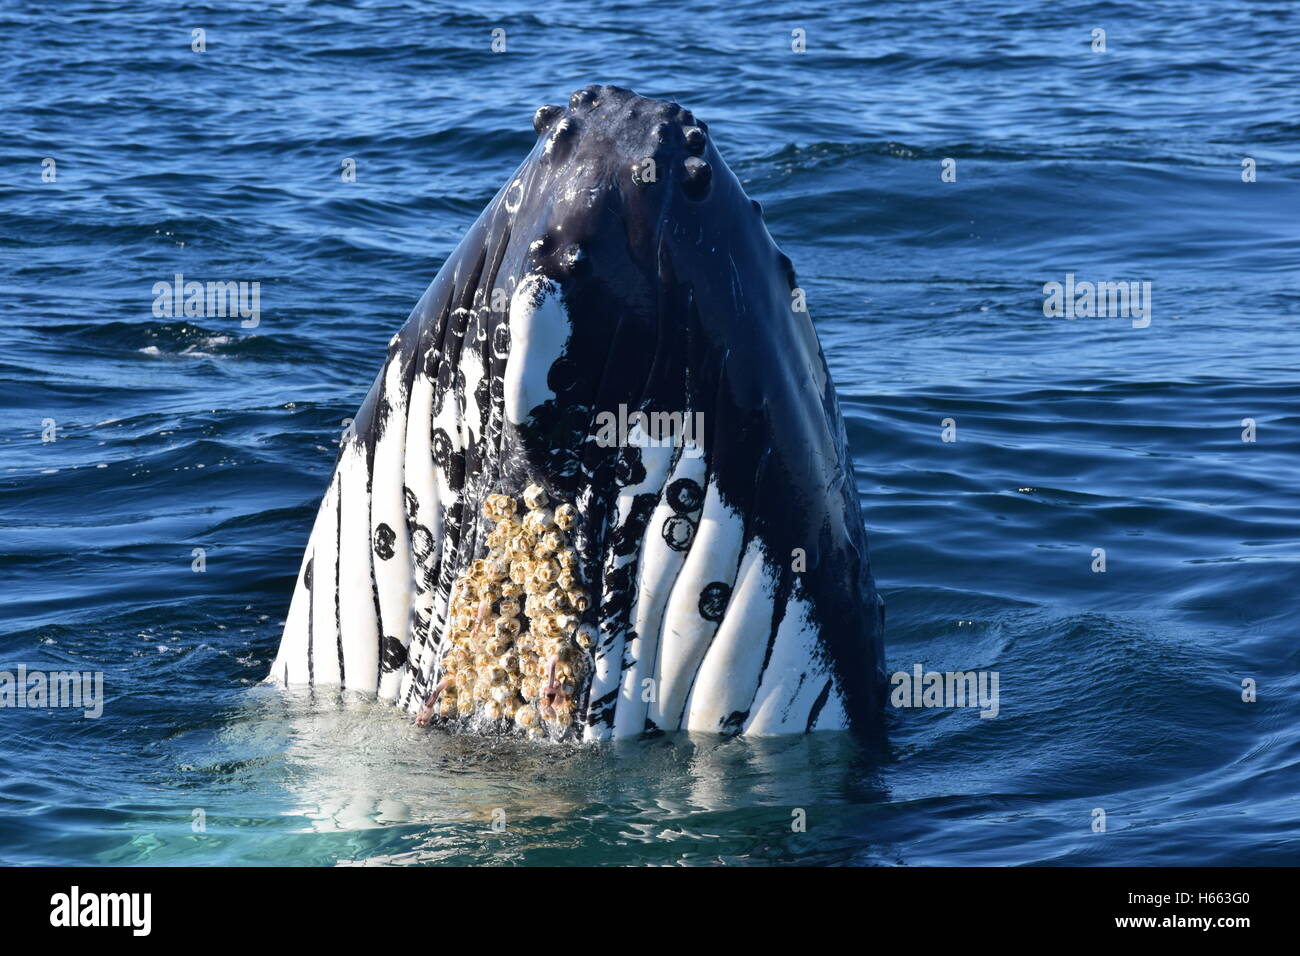 A humpback whale spy hopping, with barnacles visible on the belly. Stock Photo